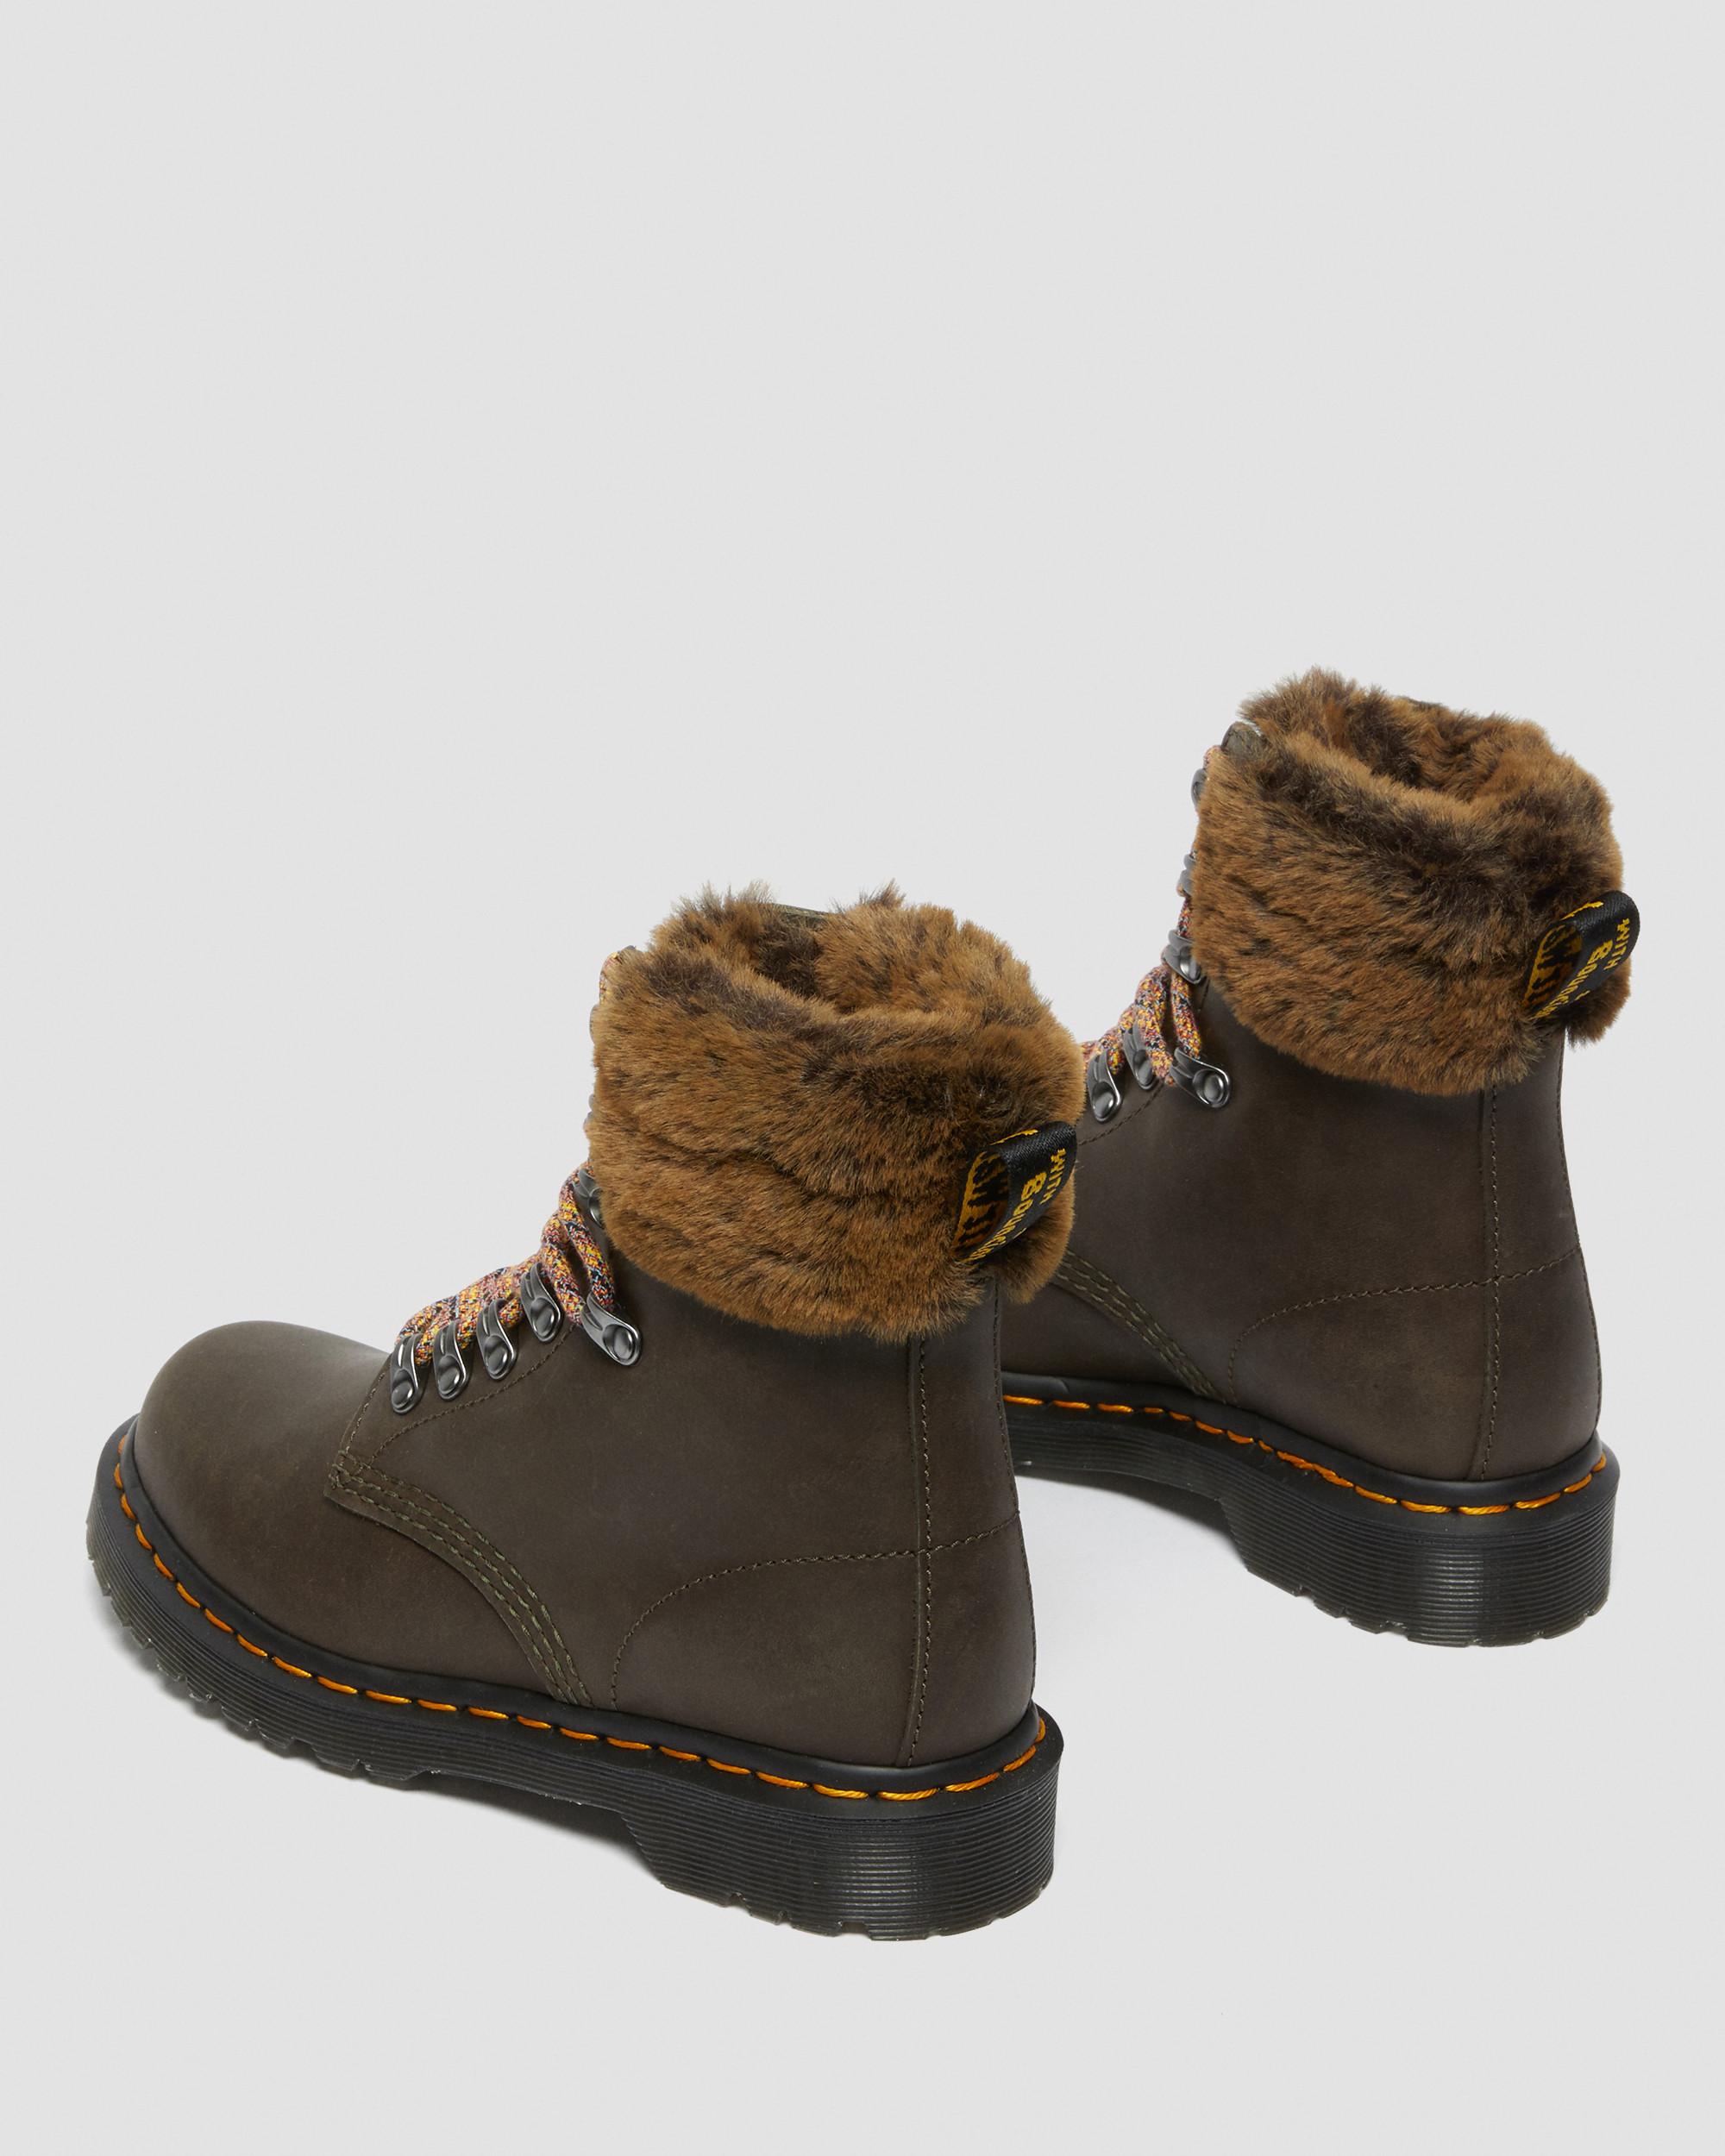 DR MARTENS 1460 Serena Collar Faux Fur Lined Lace Up Boots